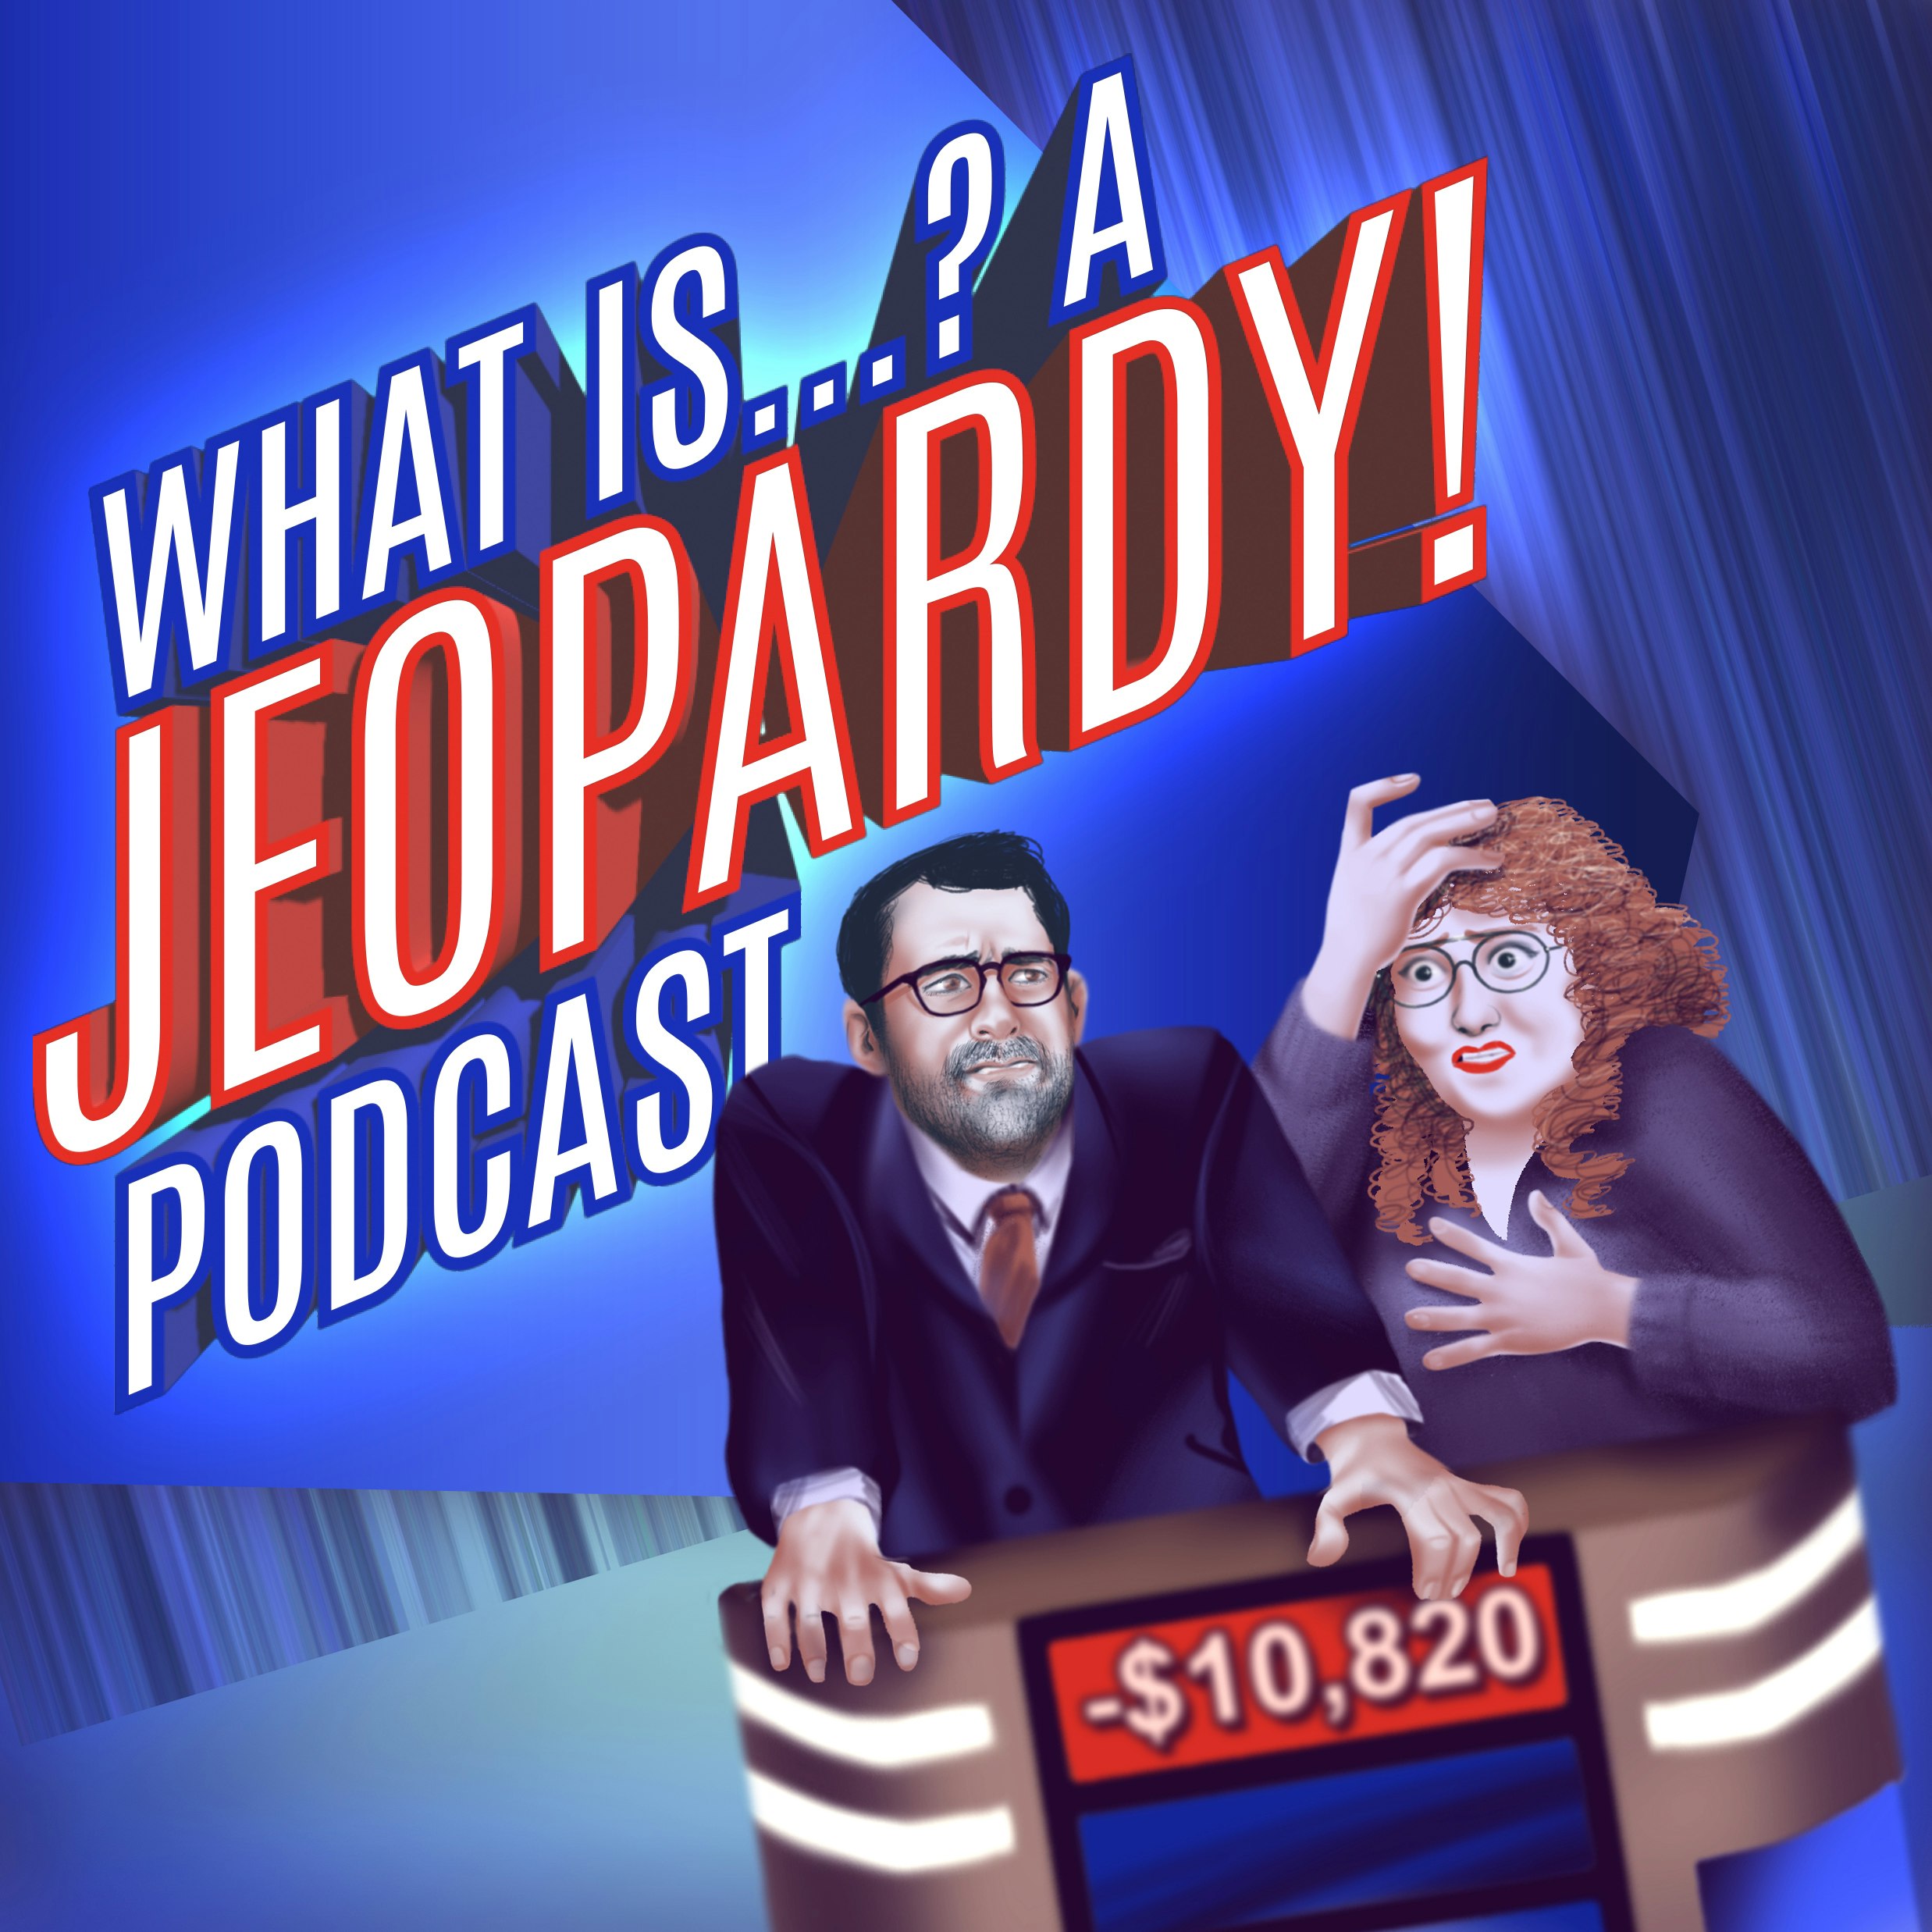 What Is...a Jeopardy! Podcast